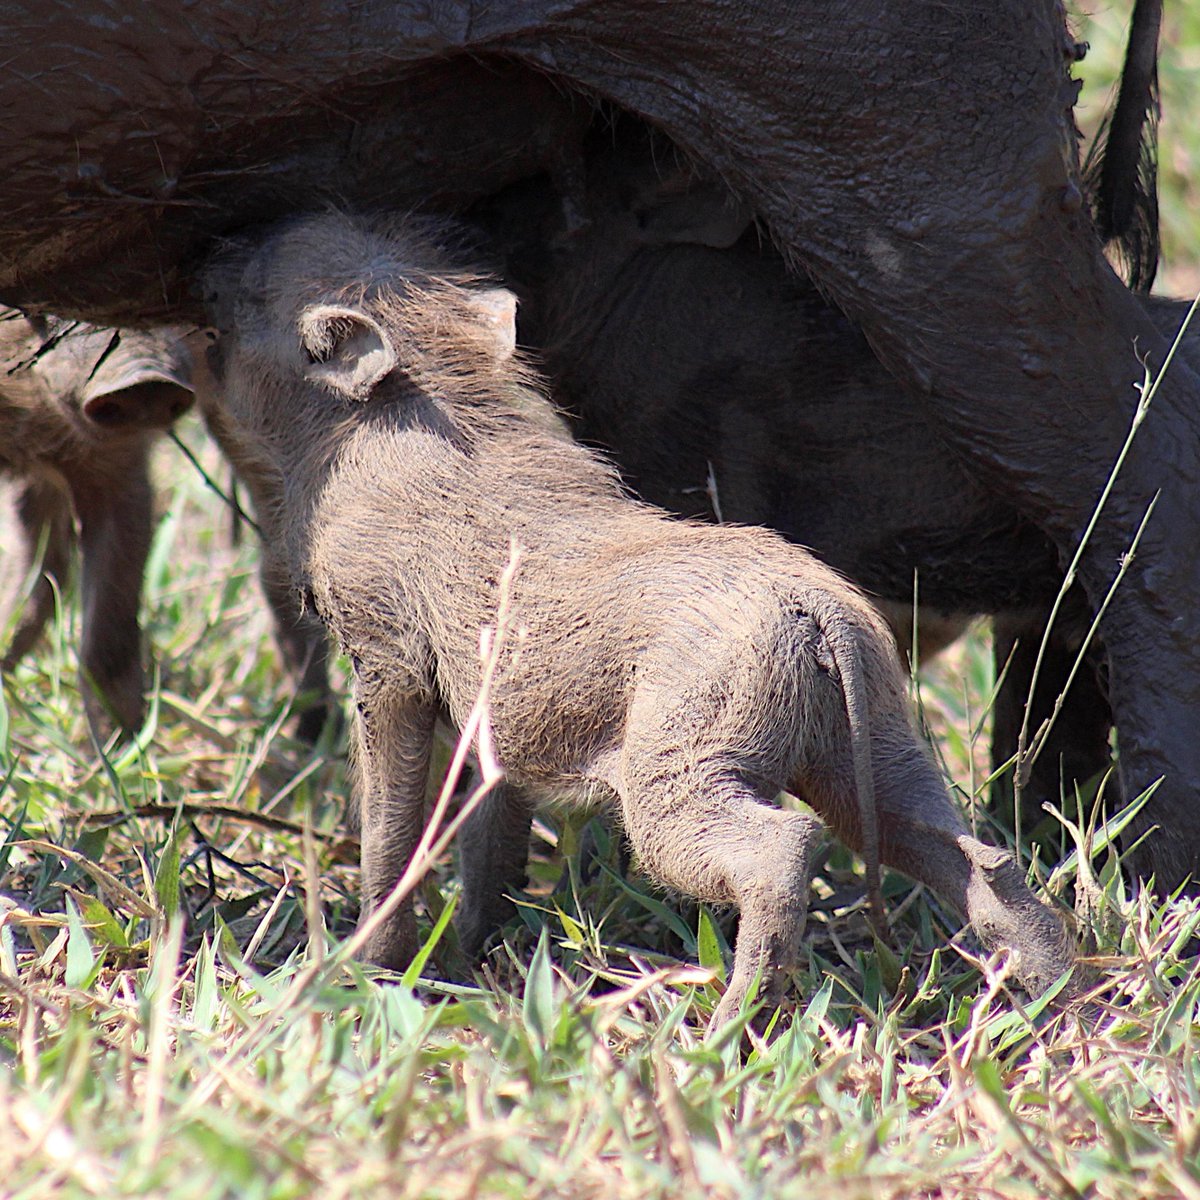 IT'S WARTHOG WEDNESDAY with these lil cuties to brighten up you mid-week!! How is your Wednesday going? #warthogwednesday #warthogs #adorable #cutecreatures #babyanimals #africanbush #africananimals